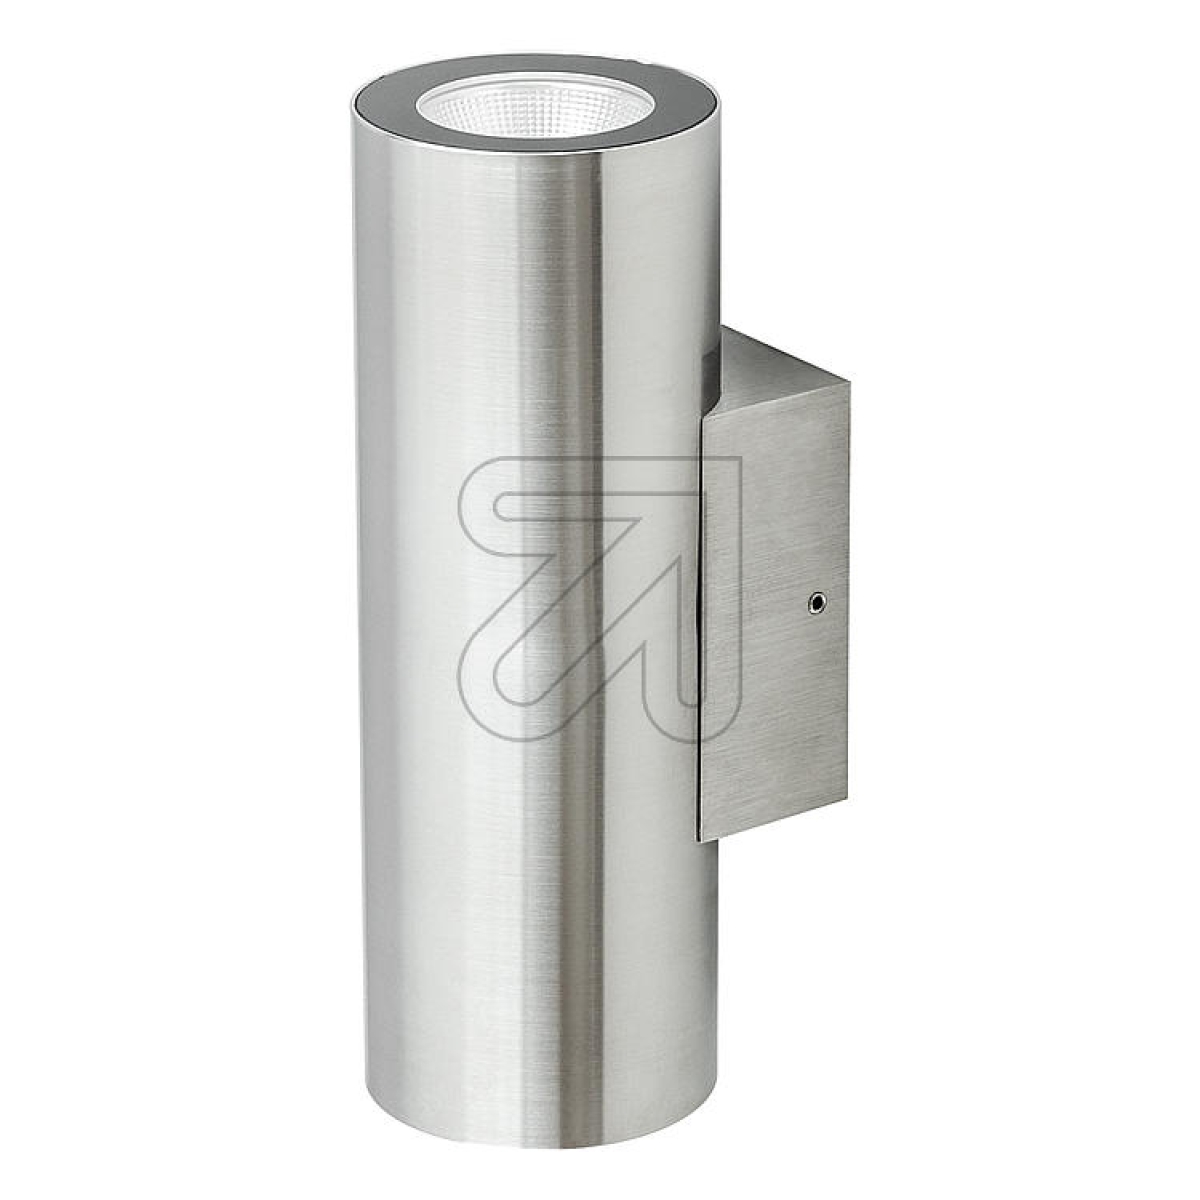 EVNLED wall light IP65 stainless steel 3000K 14W C65141002Article-No: 627810